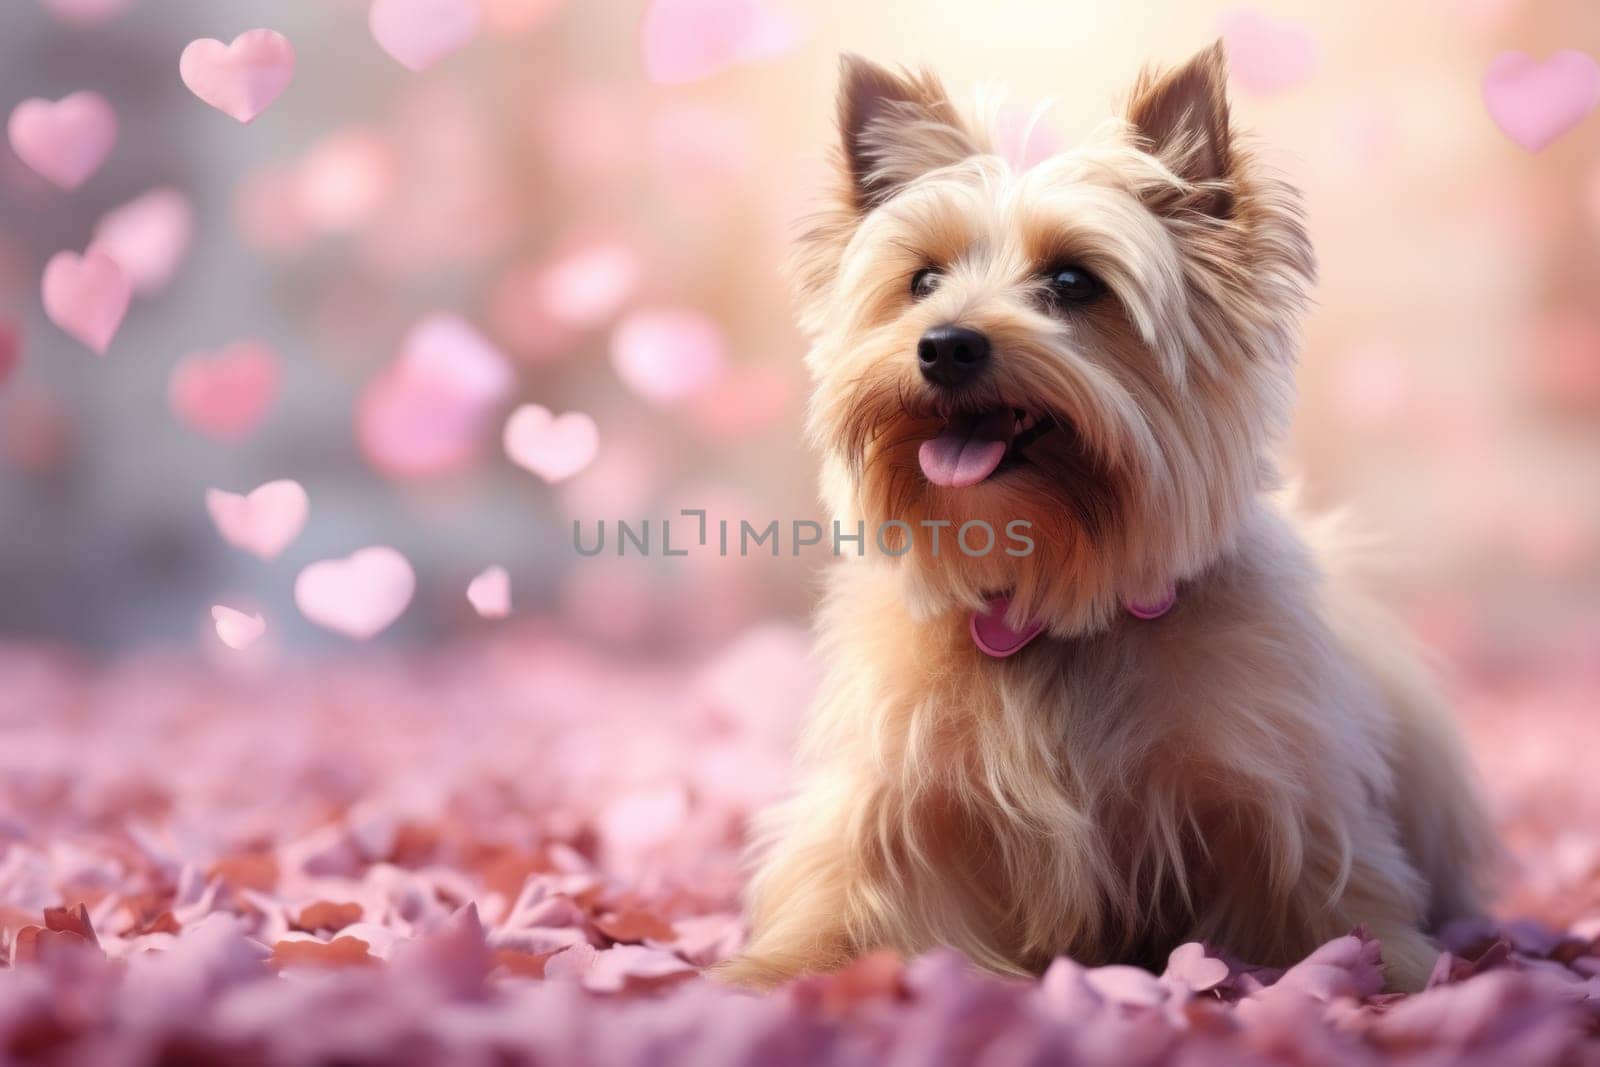 A small terrier dog sitting on a bed of pink flowers, AI by starush